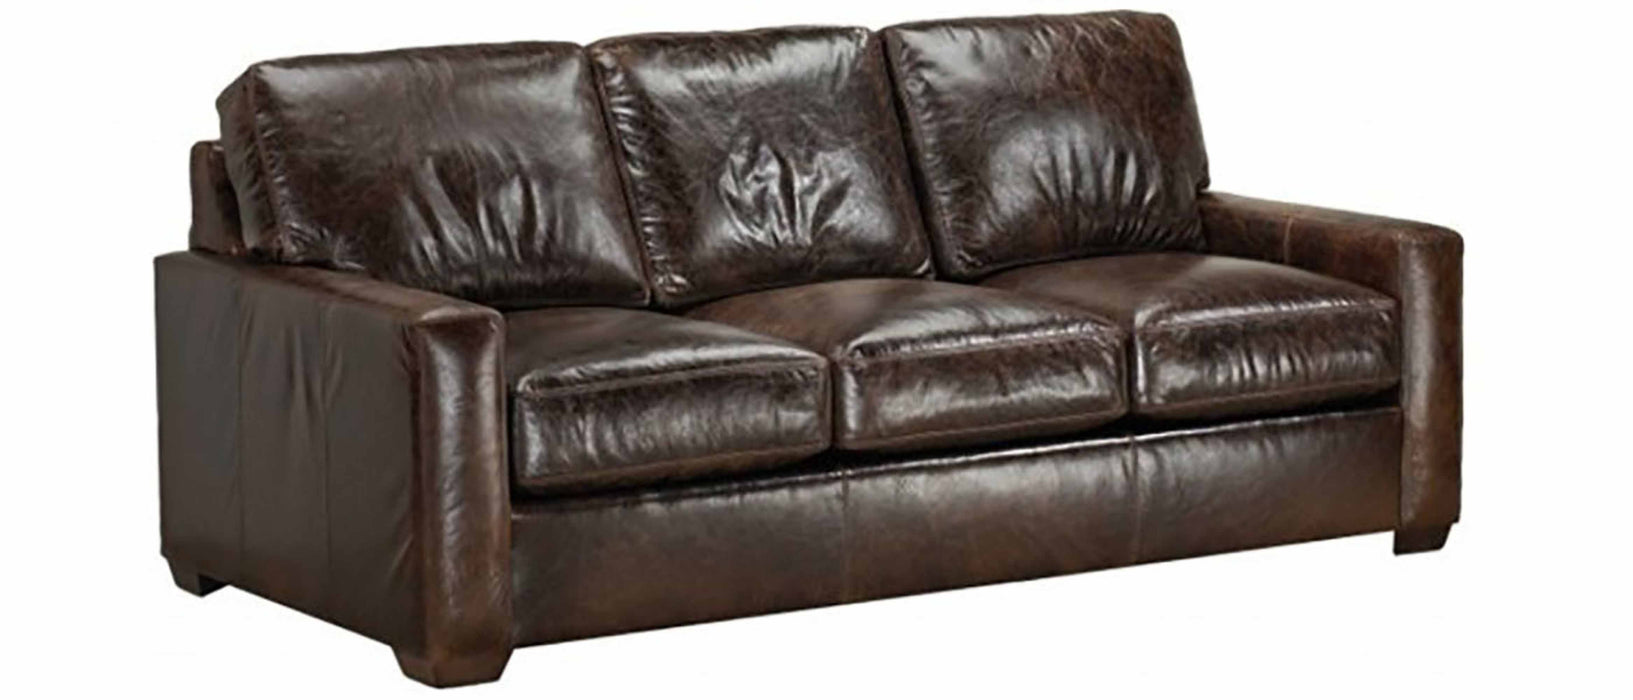 Chancellor Leather Queen Size Sofa Sleeper